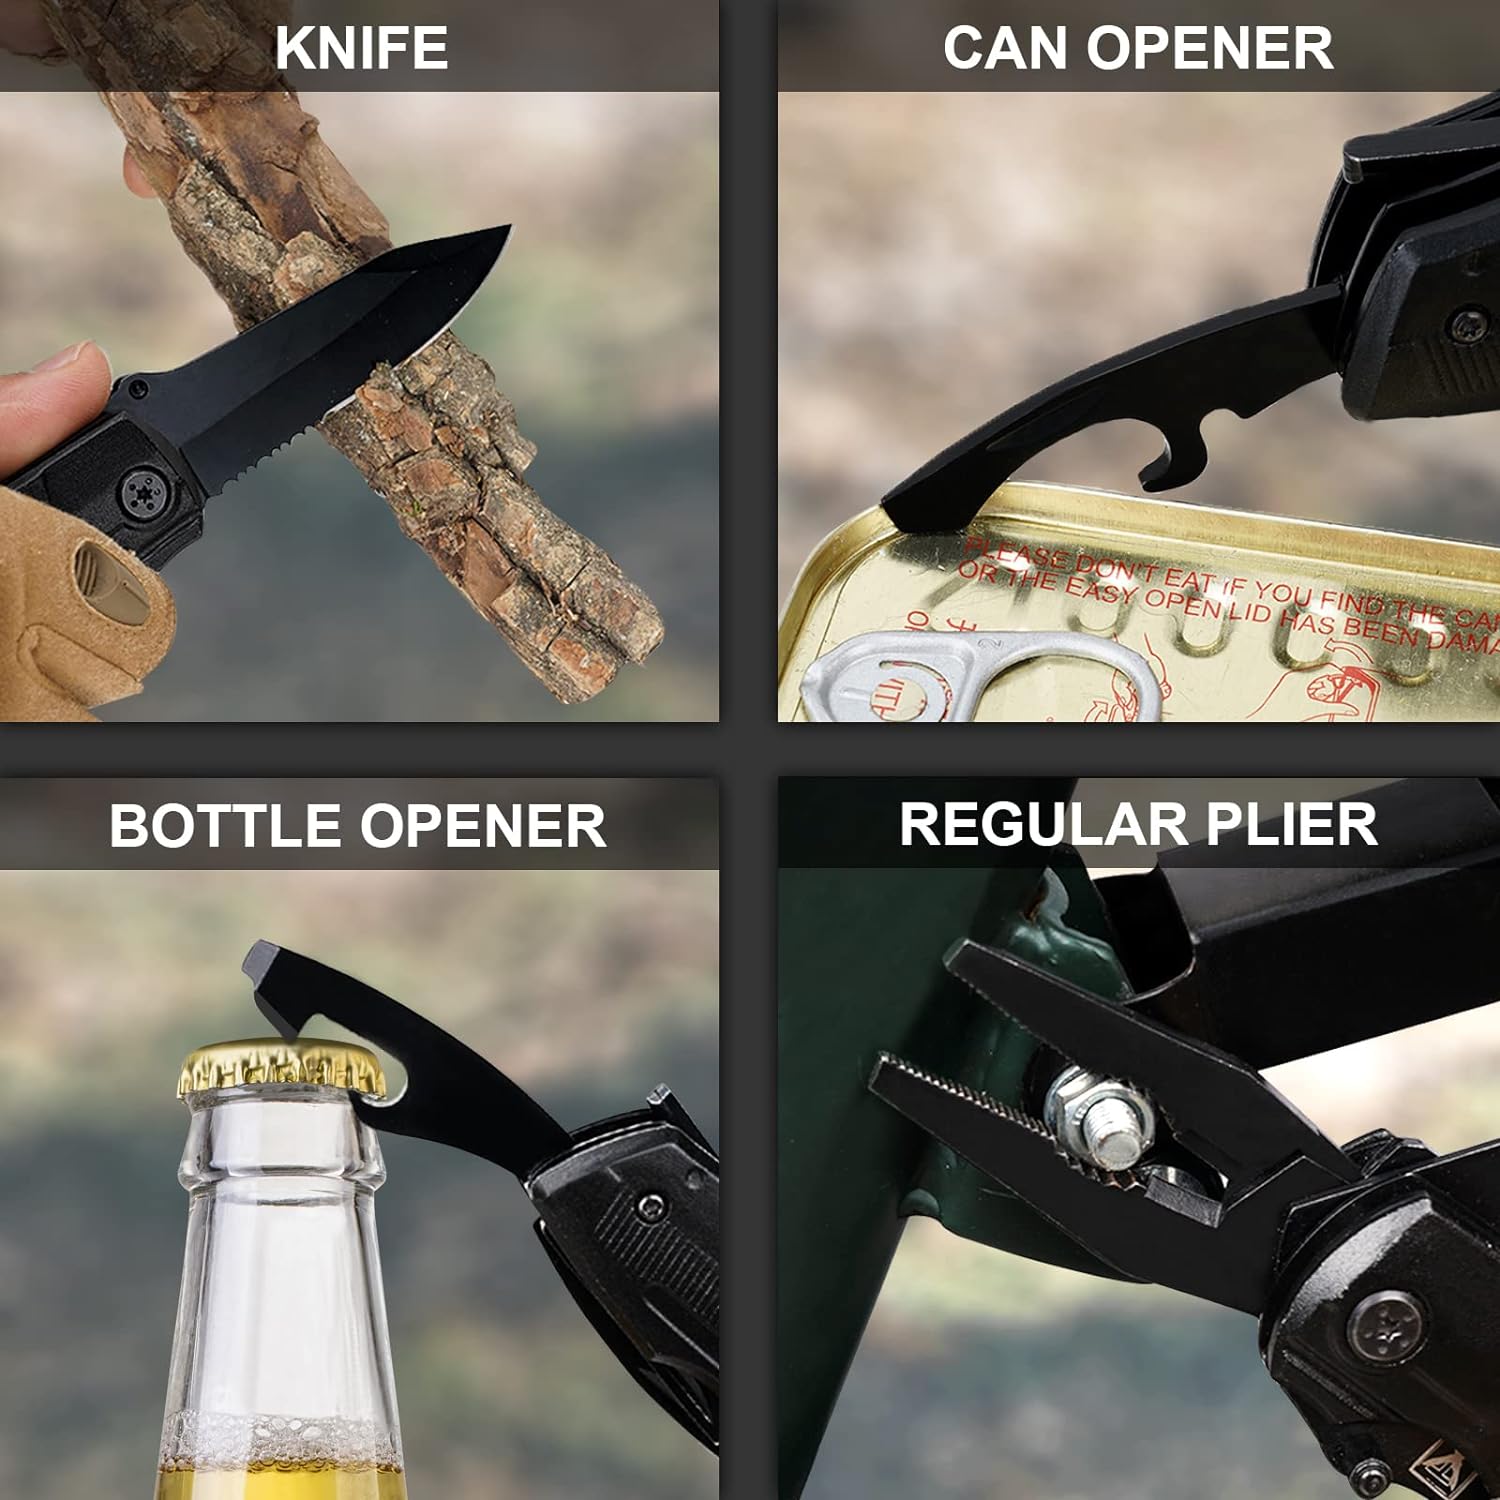 Gifts for Men Dad, Men Stocking Stuffers, Christmas Birthday Gifts, Pocket Knife Multitool, Best DAD Ever Cool Folding Knife, Unique Outdoor Camping Hiking Fishing Tools Gift Ideas